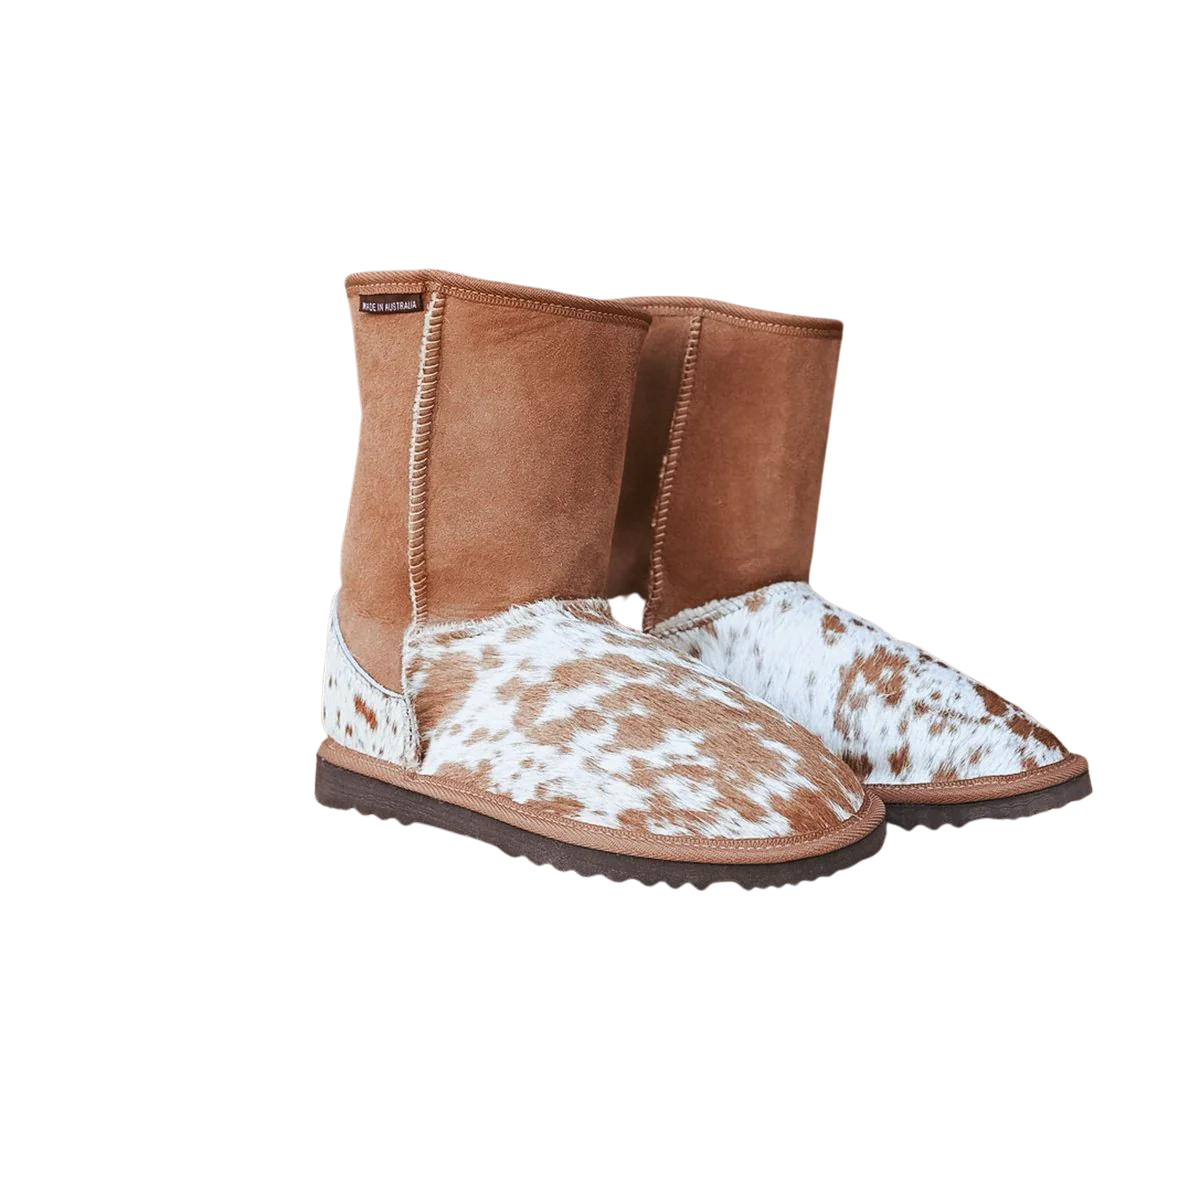 3/4 Classic Ugg Boot - Rawhide Brown and White